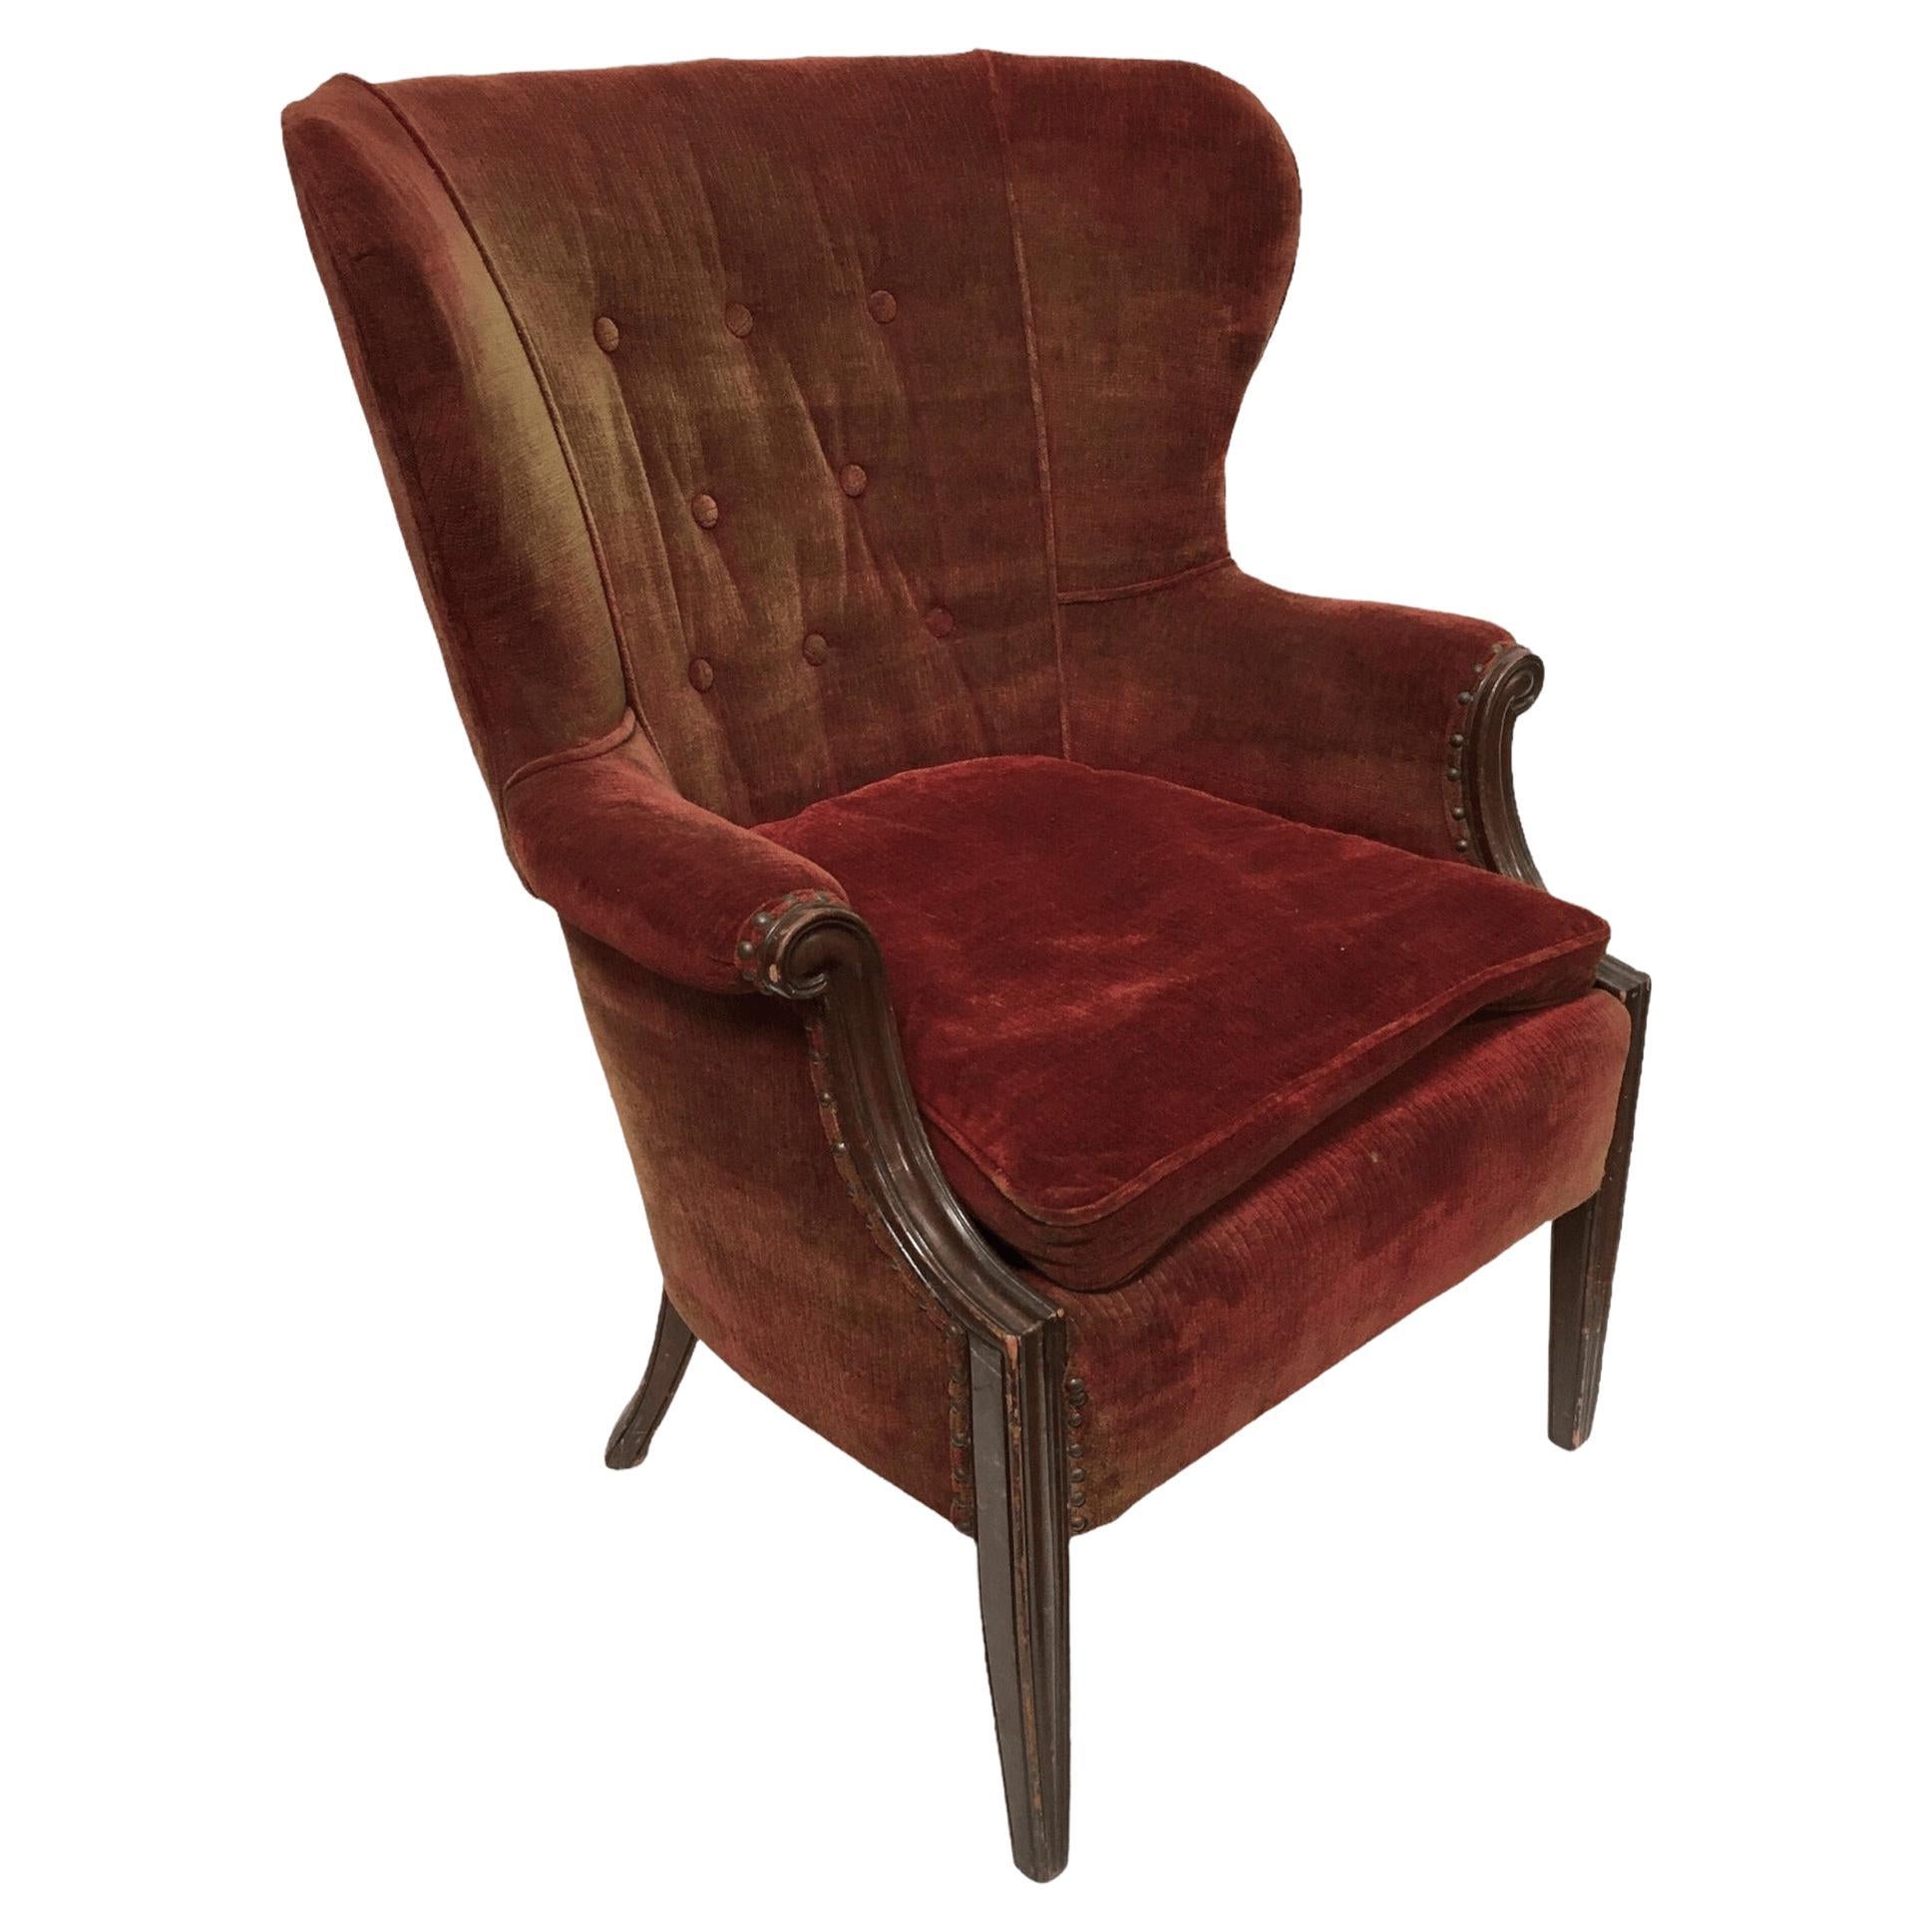 Vintage Red Velvet Wingback Chair W/ Tufted Seats, C 1920